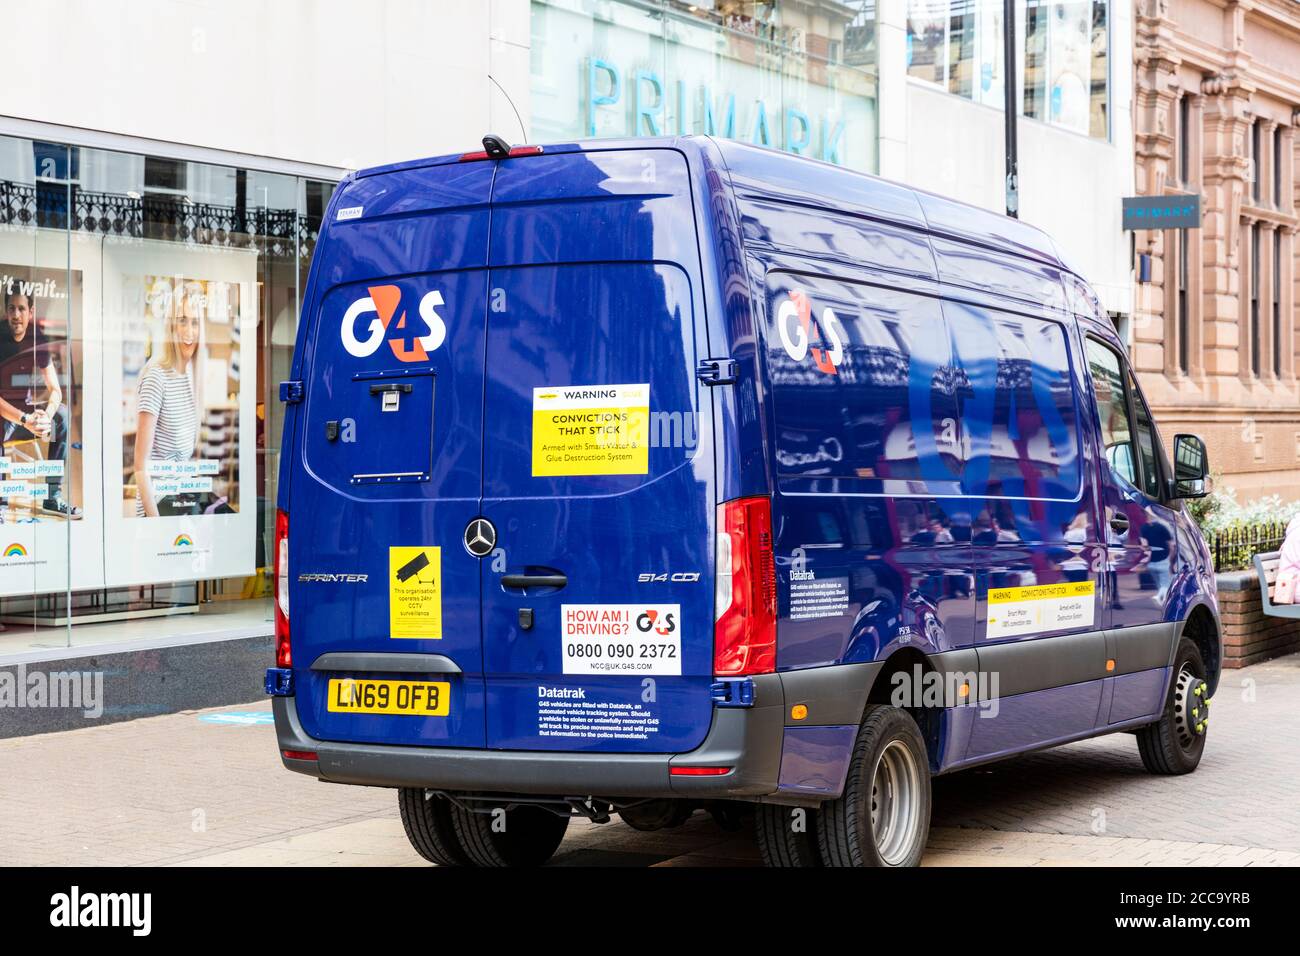 G4s Van High Resolution Stock Photography and Images - Alamy